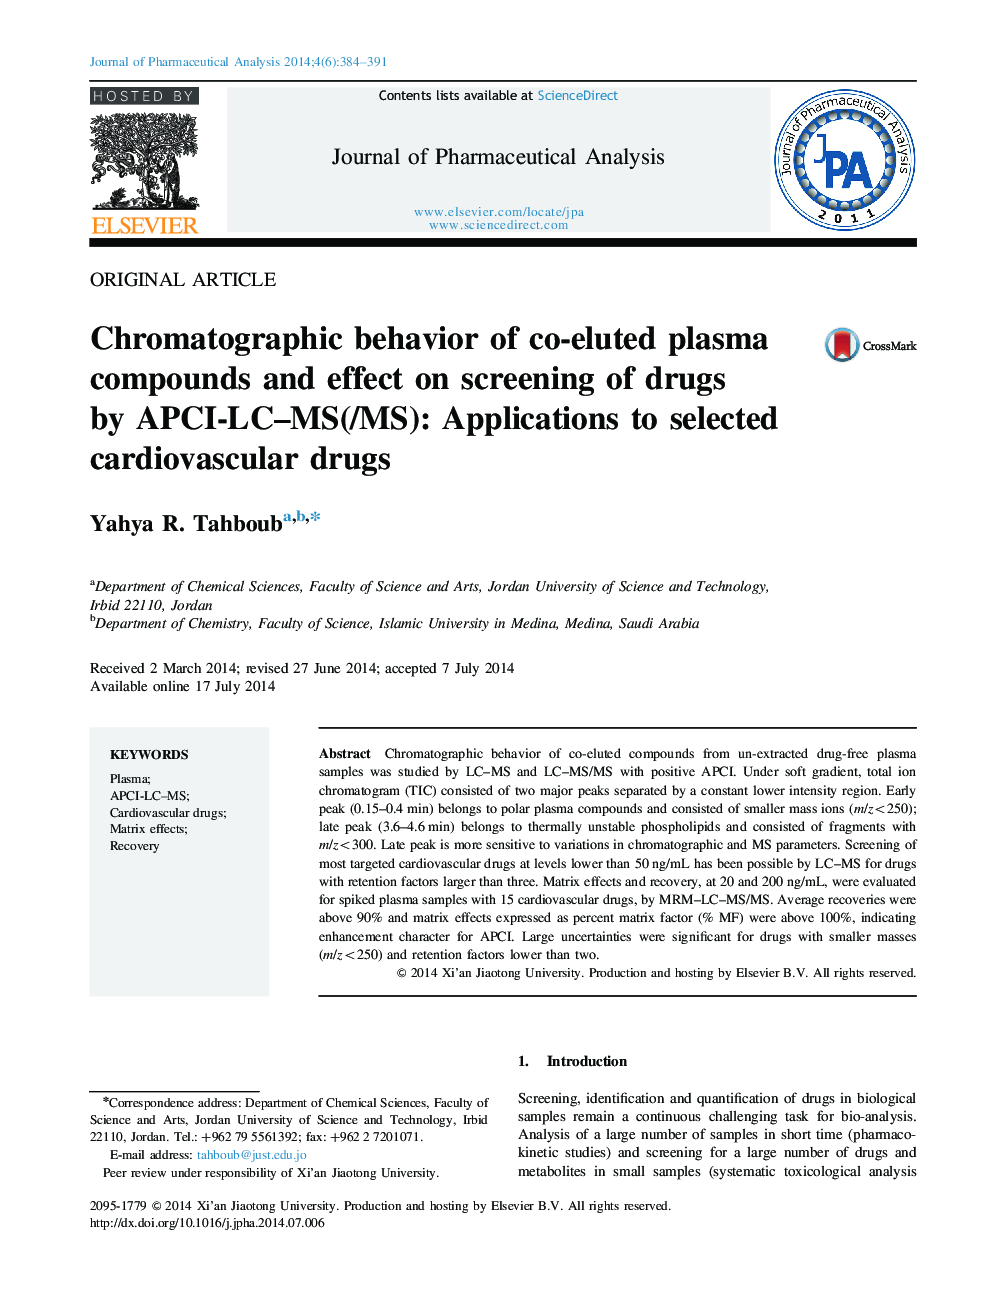 Chromatographic behavior of co-eluted plasma compounds and effect on screening of drugs by APCI-LC–MS(/MS): Applications to selected cardiovascular drugs 